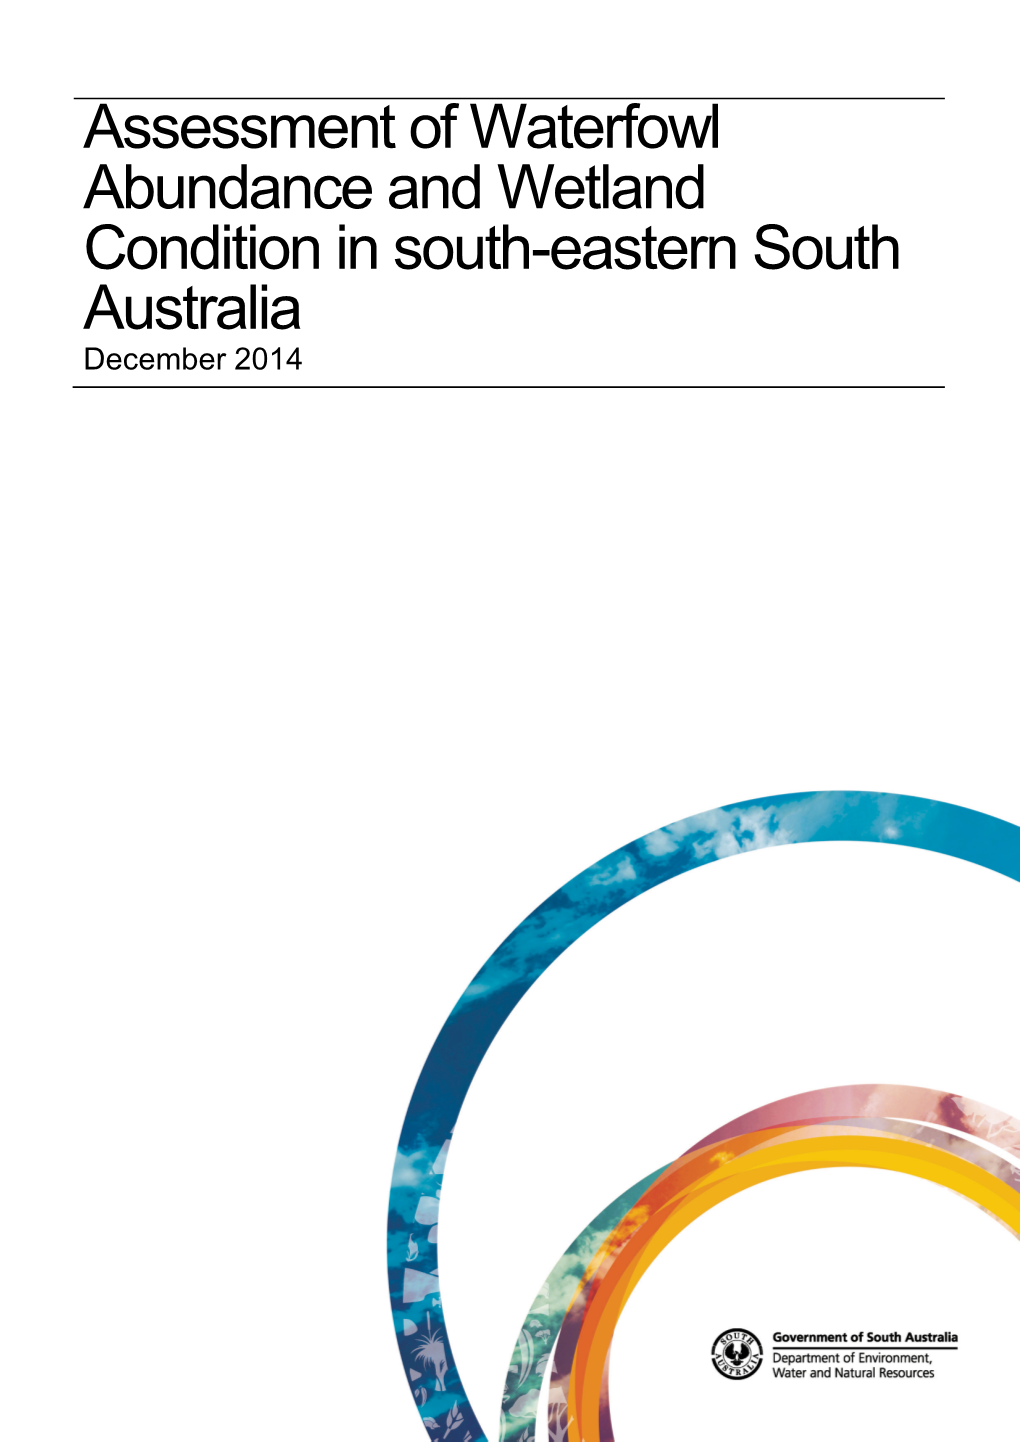 Assessment of Waterfowl Abundance and Wetland Condition in South-Eastern South Australia December 2014